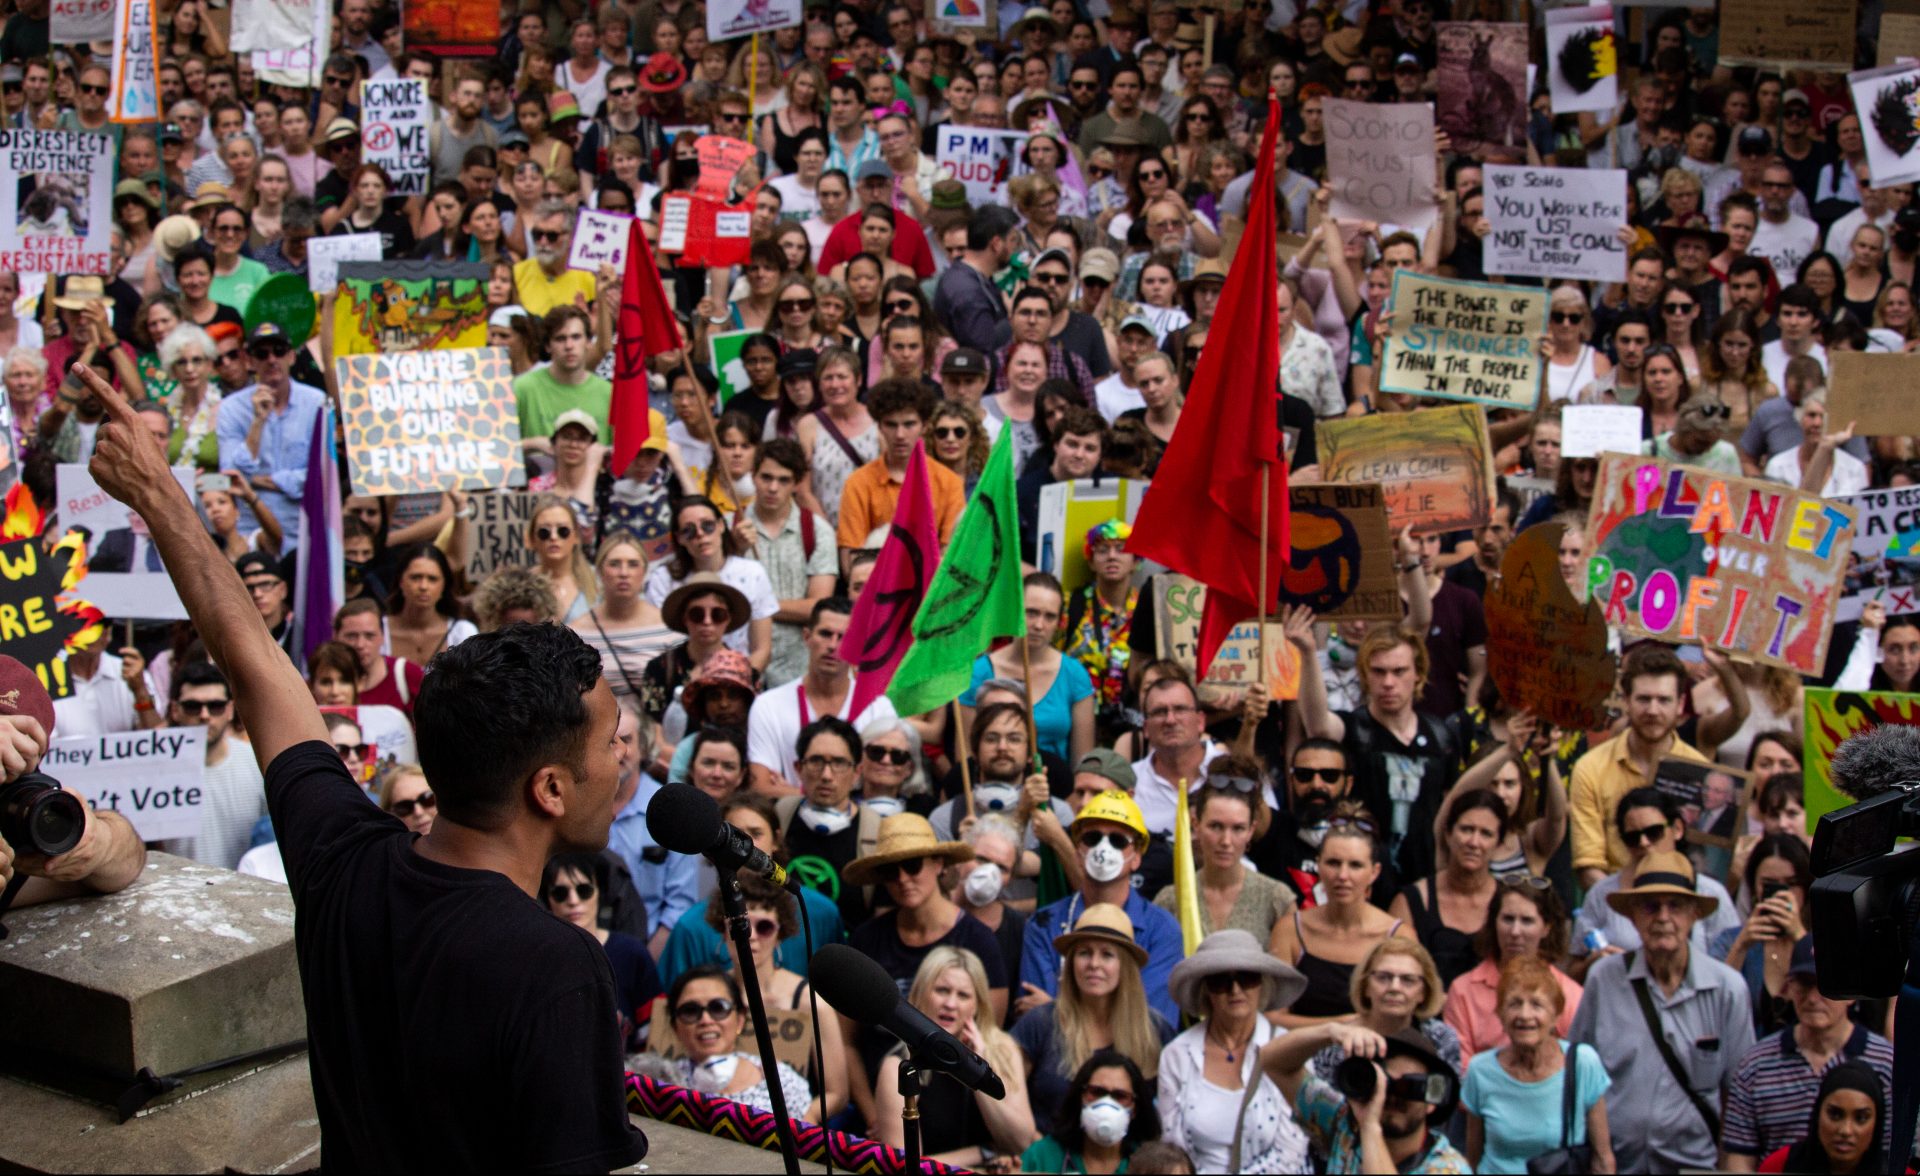 Photo taken from the climate change rally/bushfire protest in downtown Sydney, Australia, on January 10, 2020. For more photos, go to www.jordanbrownfilms.com